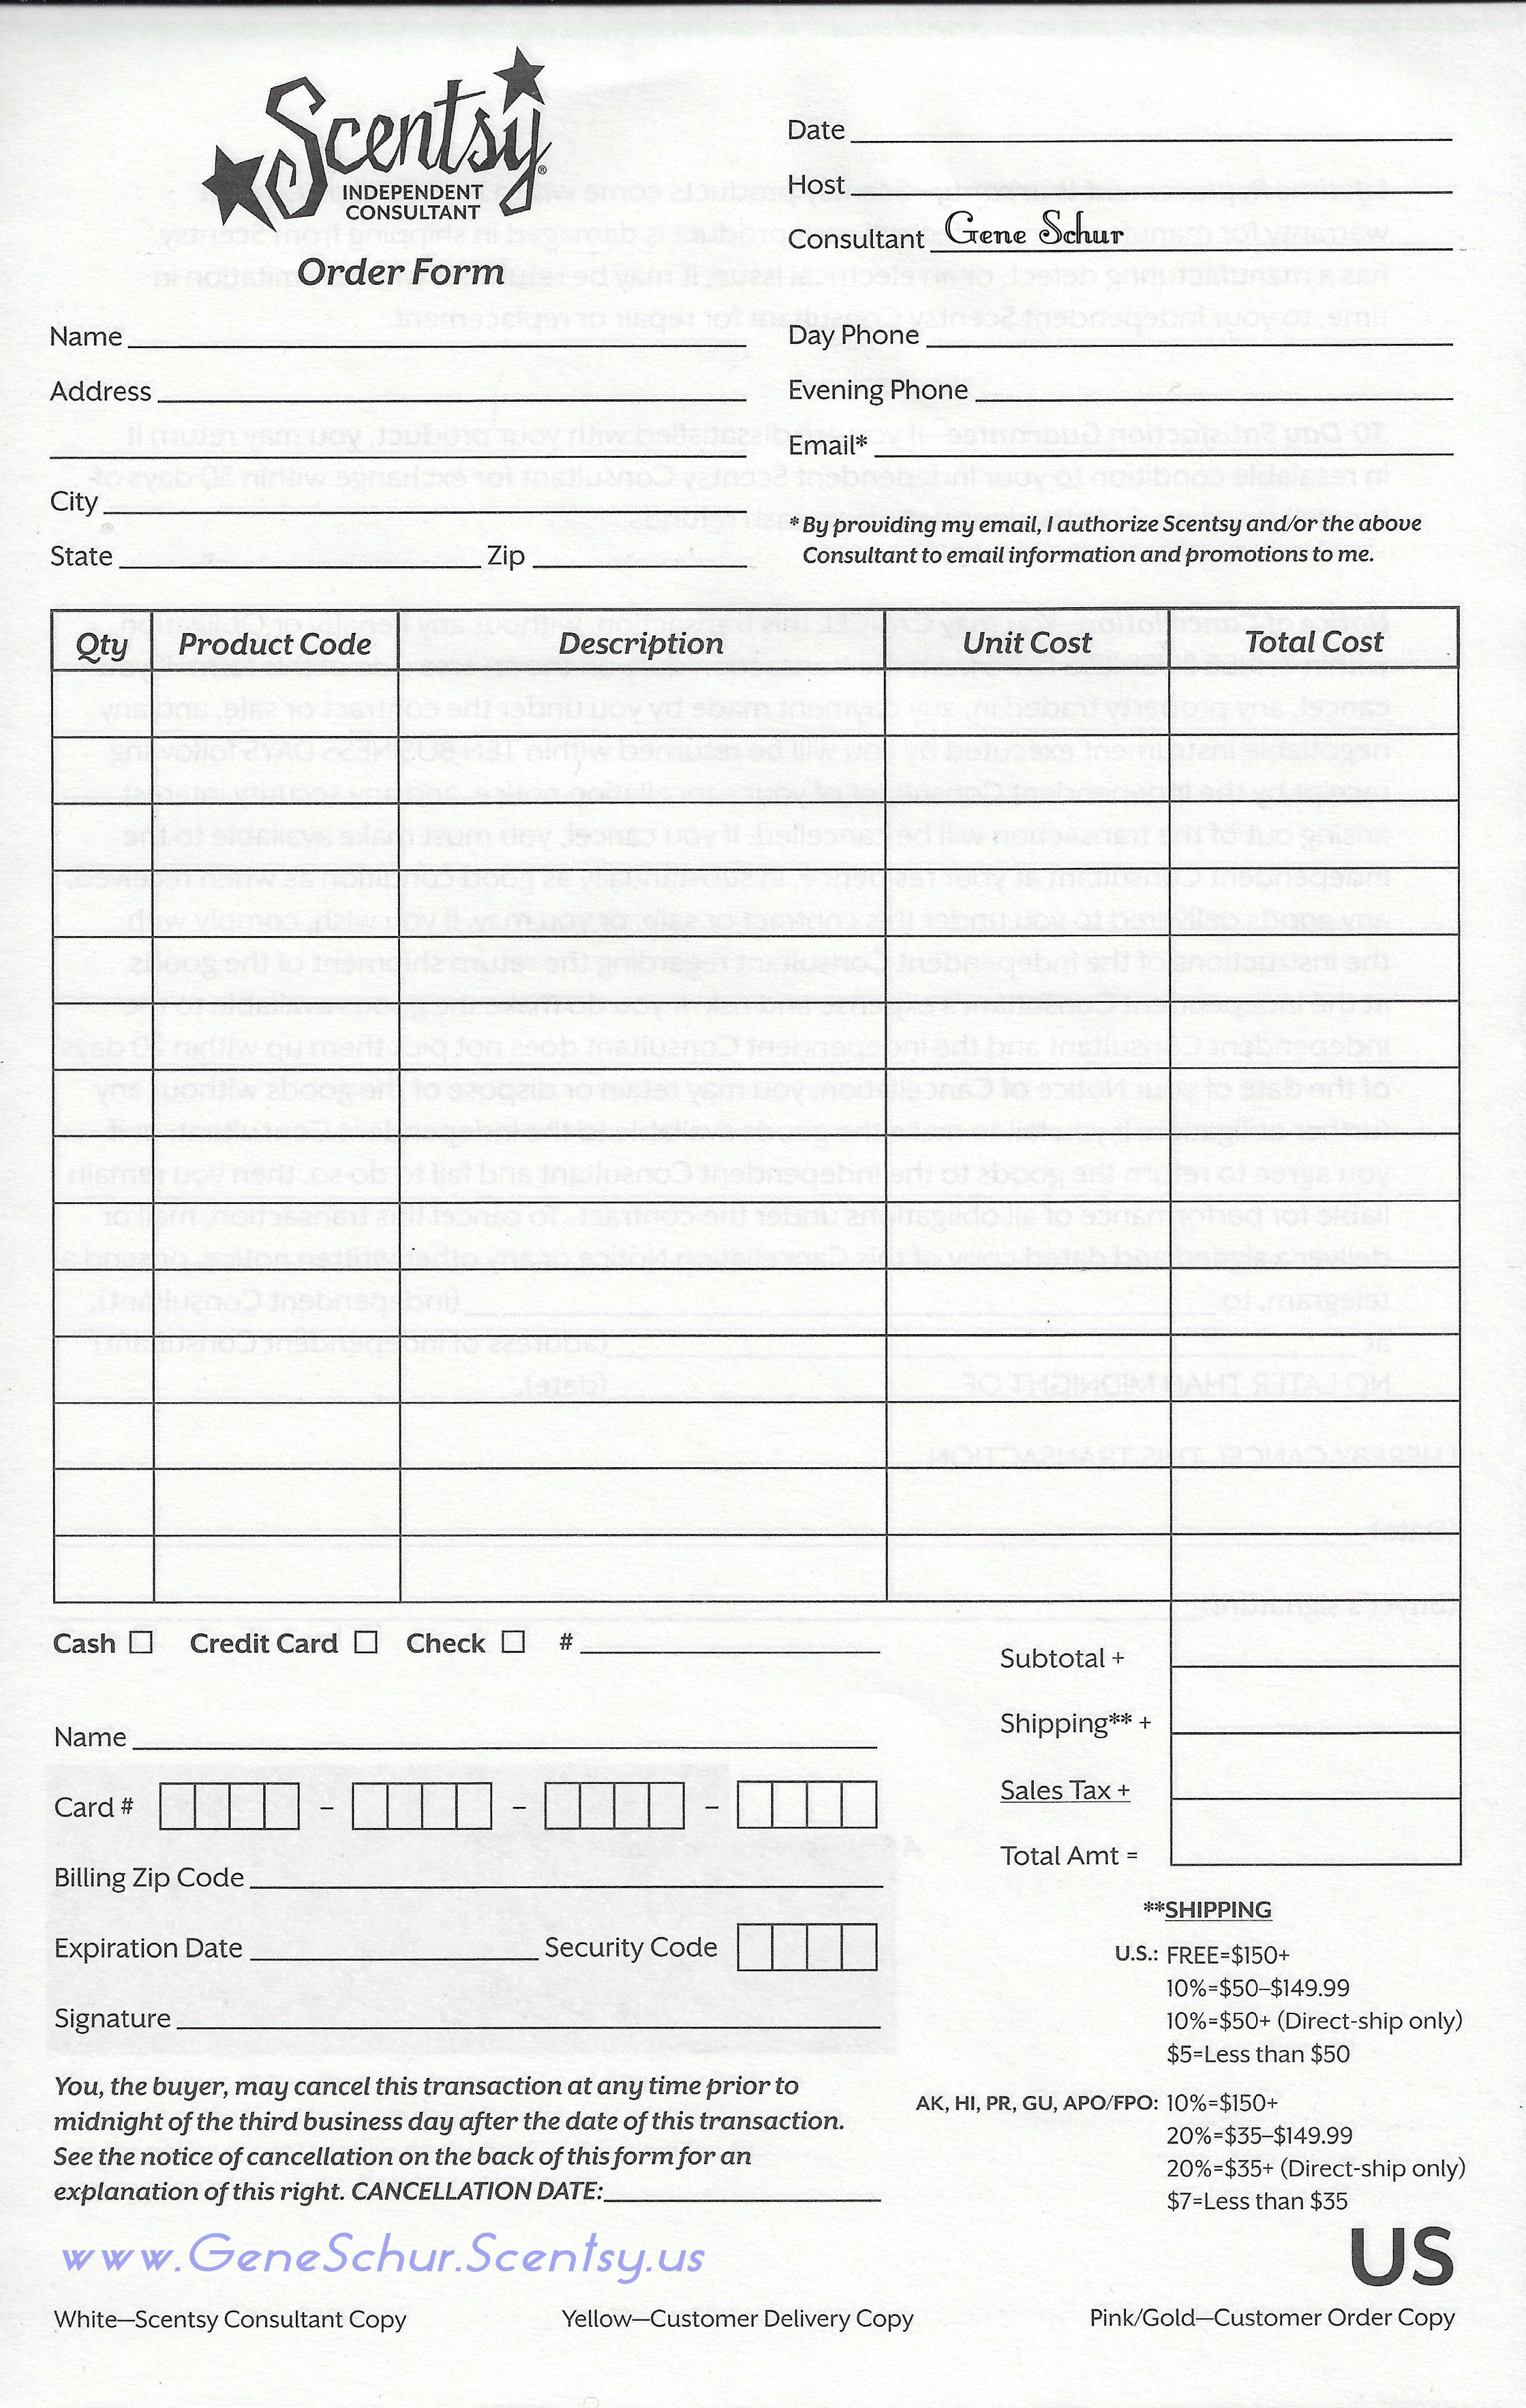 Pinjessica Kelly On Scentsy | Pinterest | Scentsy, Order Form - Free Printable Scentsy Order Forms